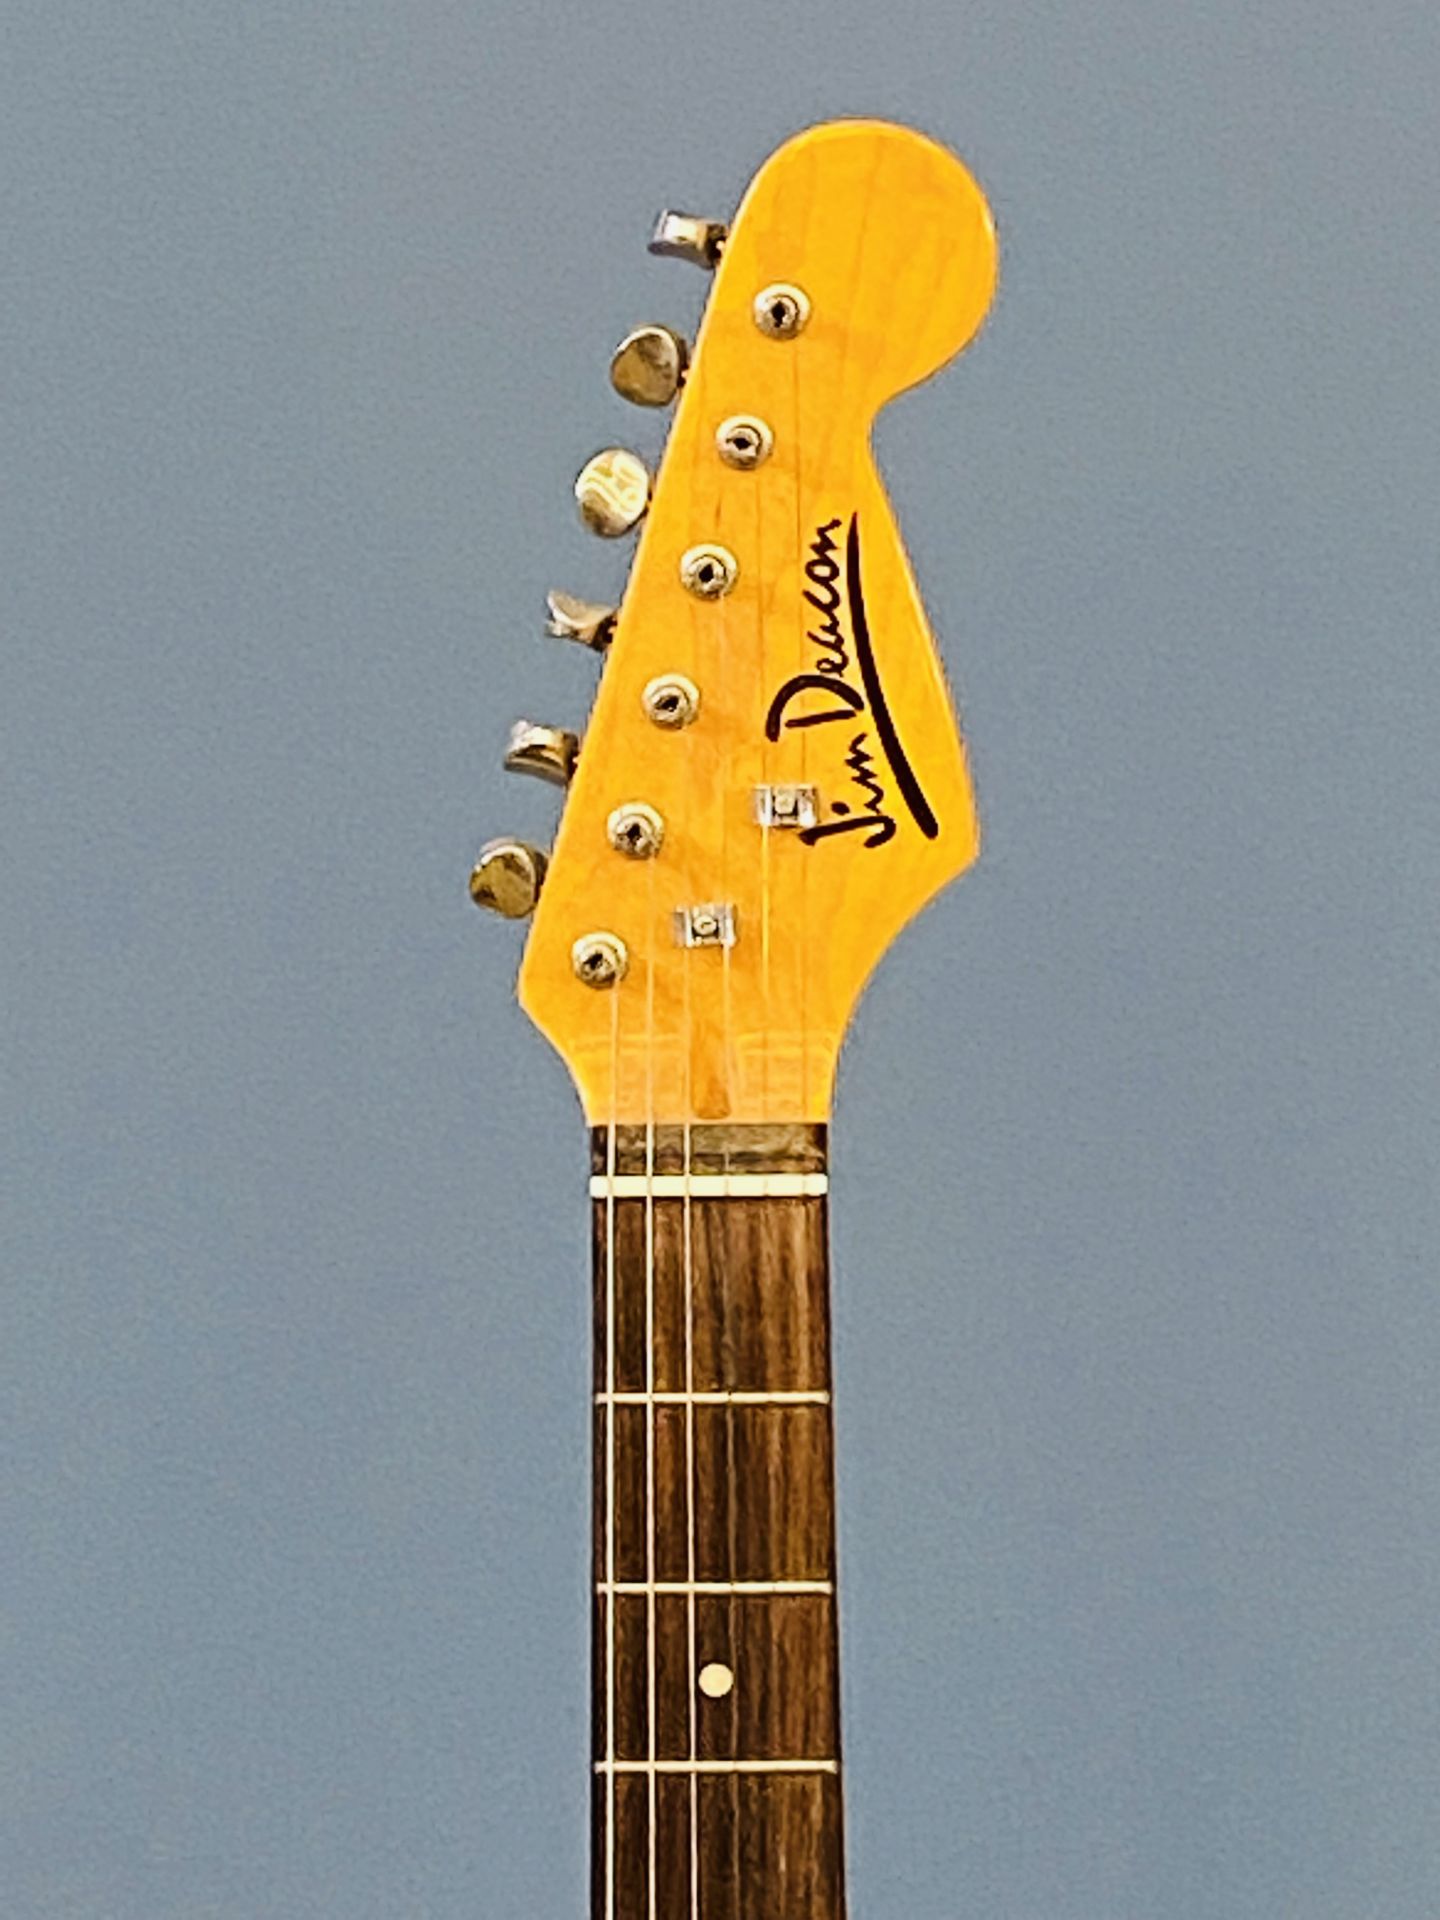 Jim Deacon Stratocaster style electric guitar - Image 2 of 4